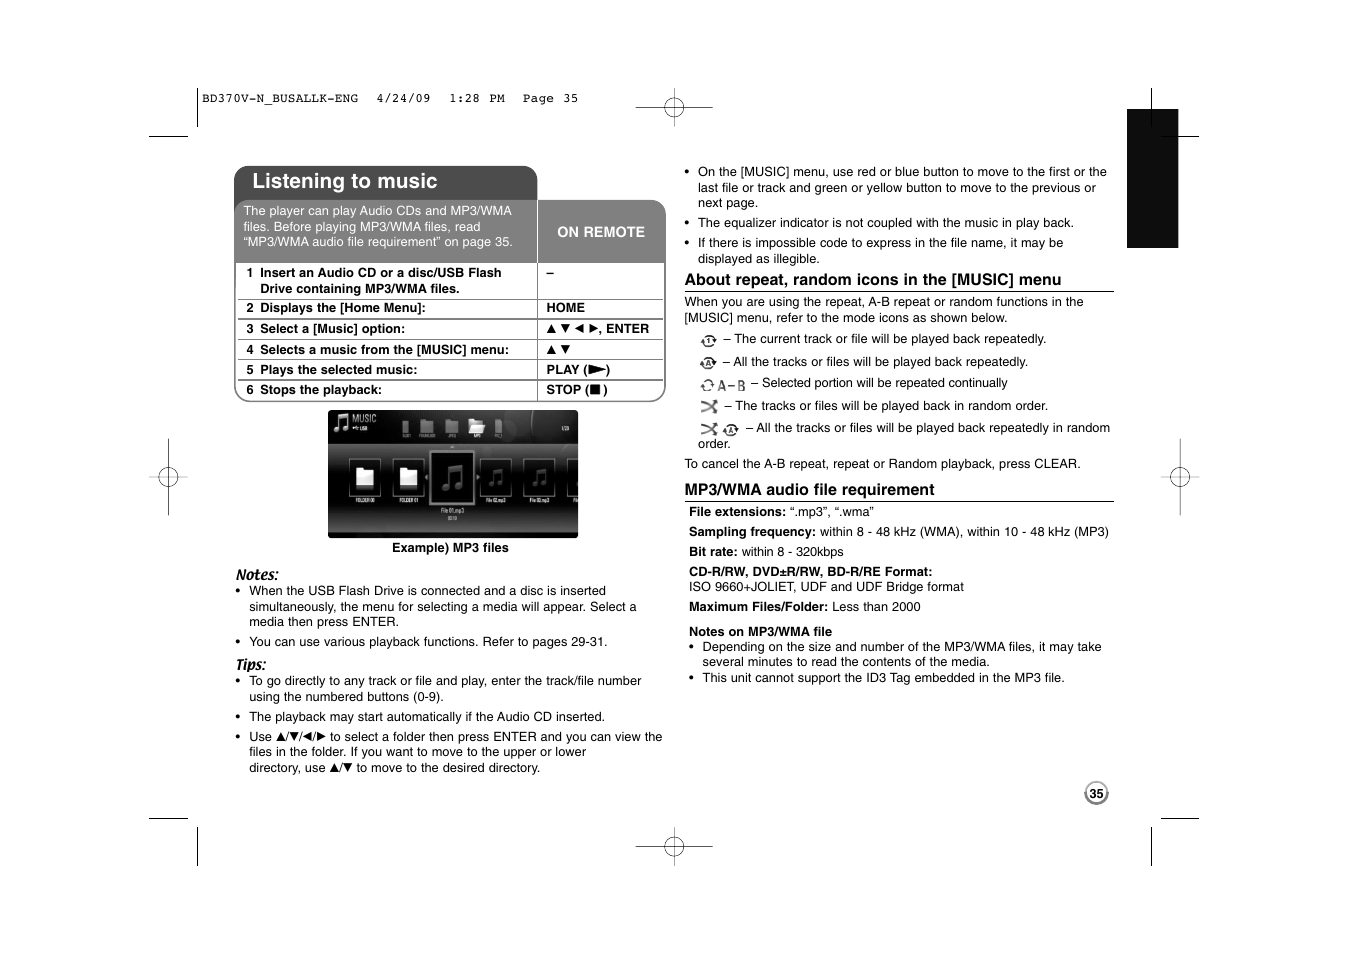 Listening to music | LG BD-370 User Manual | Page 35 / 56